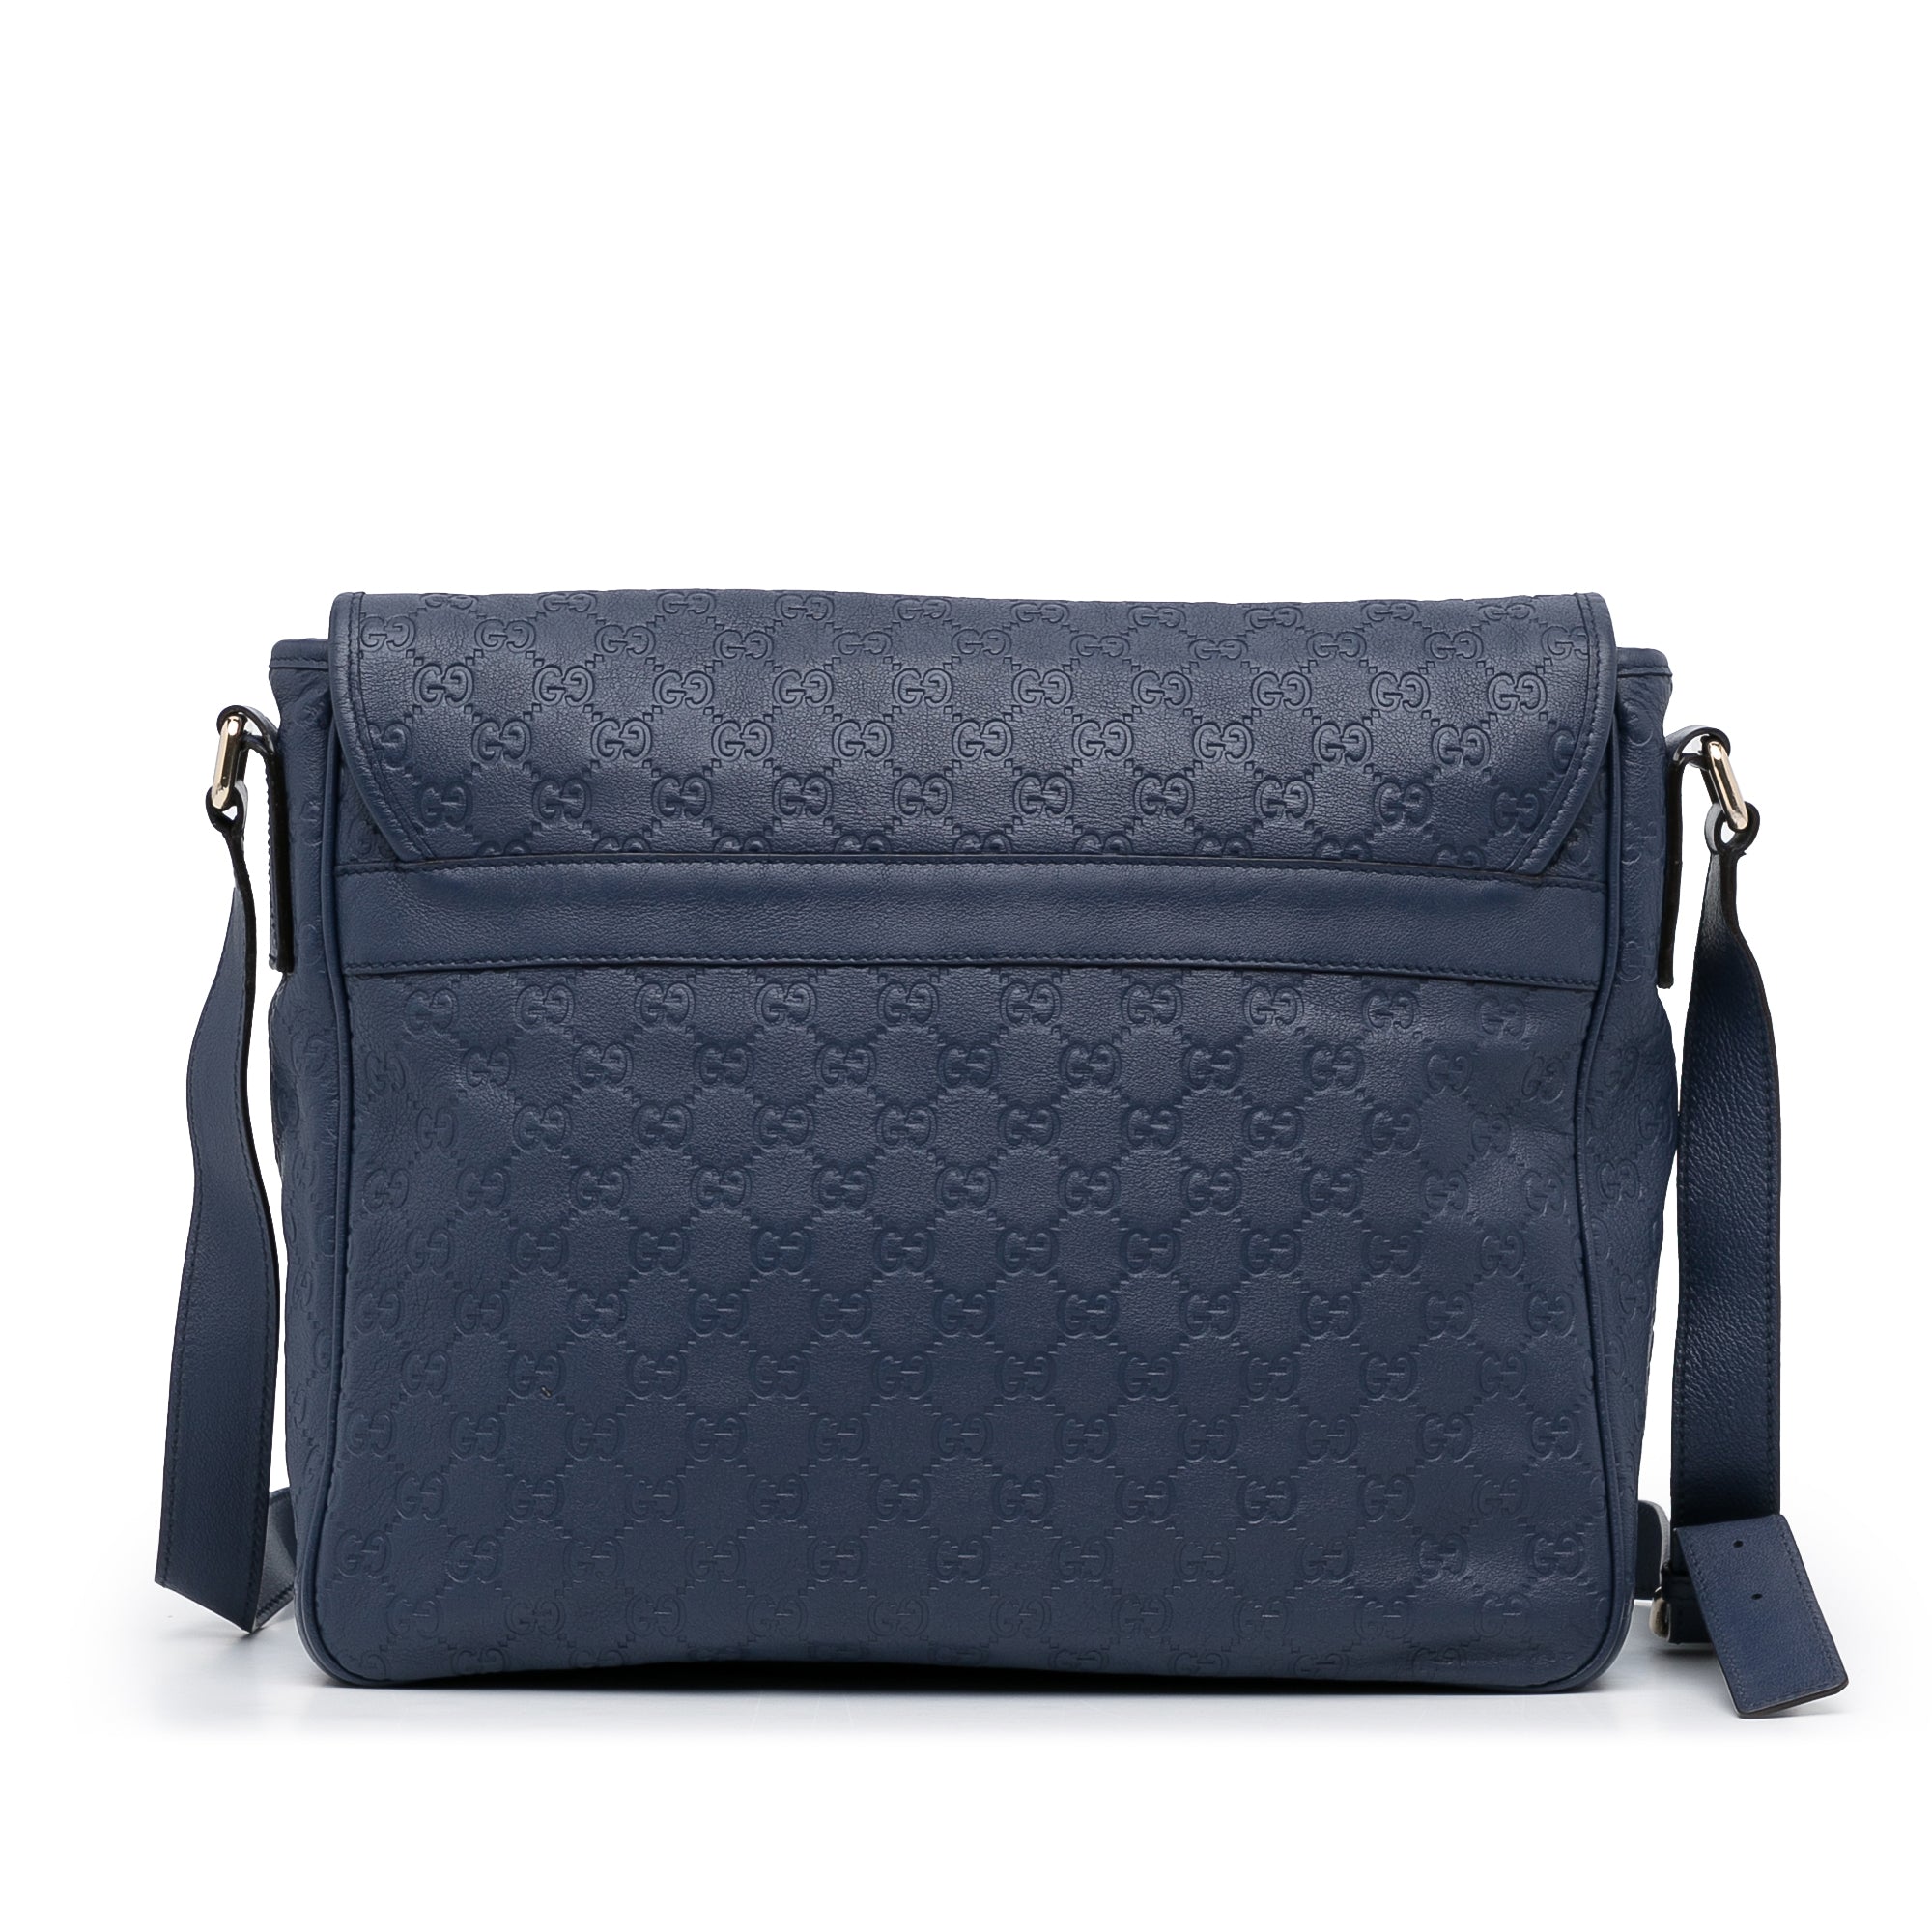 Gucci Messenger Bag Blue Guccisima Embossed Leather